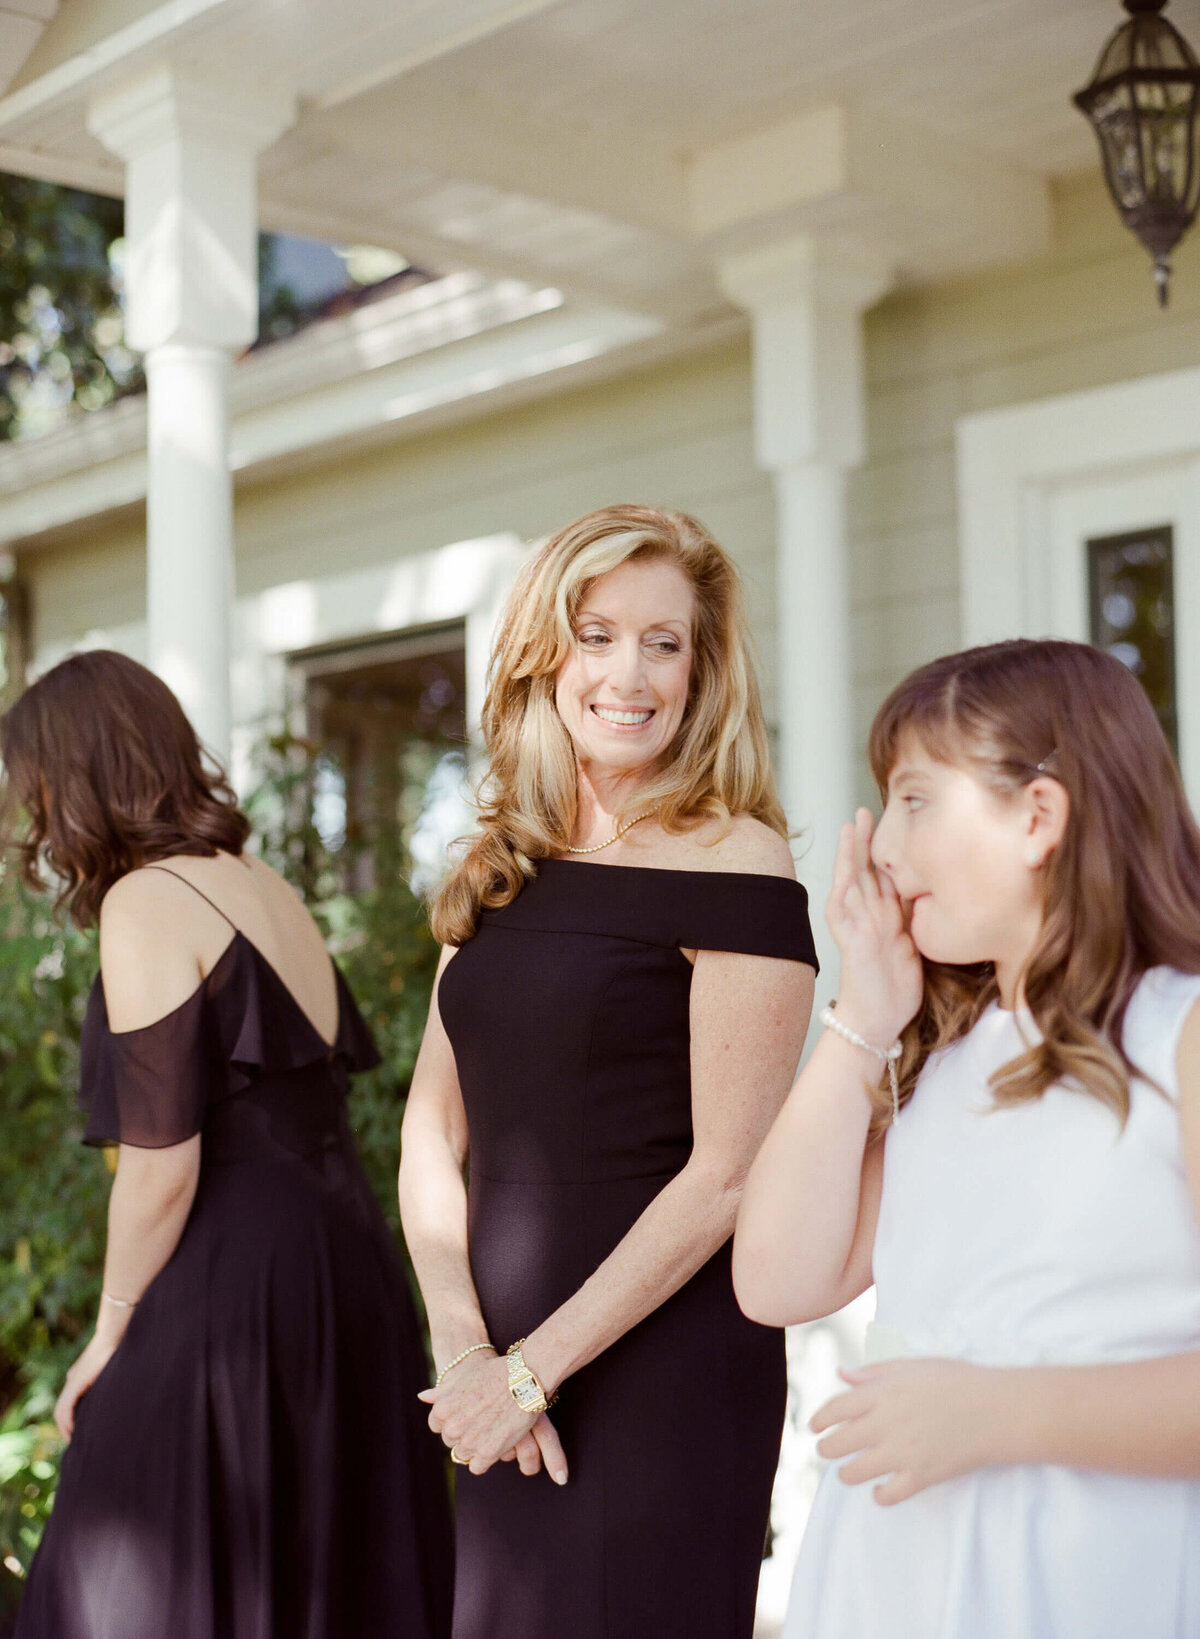 Preparations for a courtyard wedding in Wine Country are finally over as a bridesmaid watches a younger girl adjust her makeup.